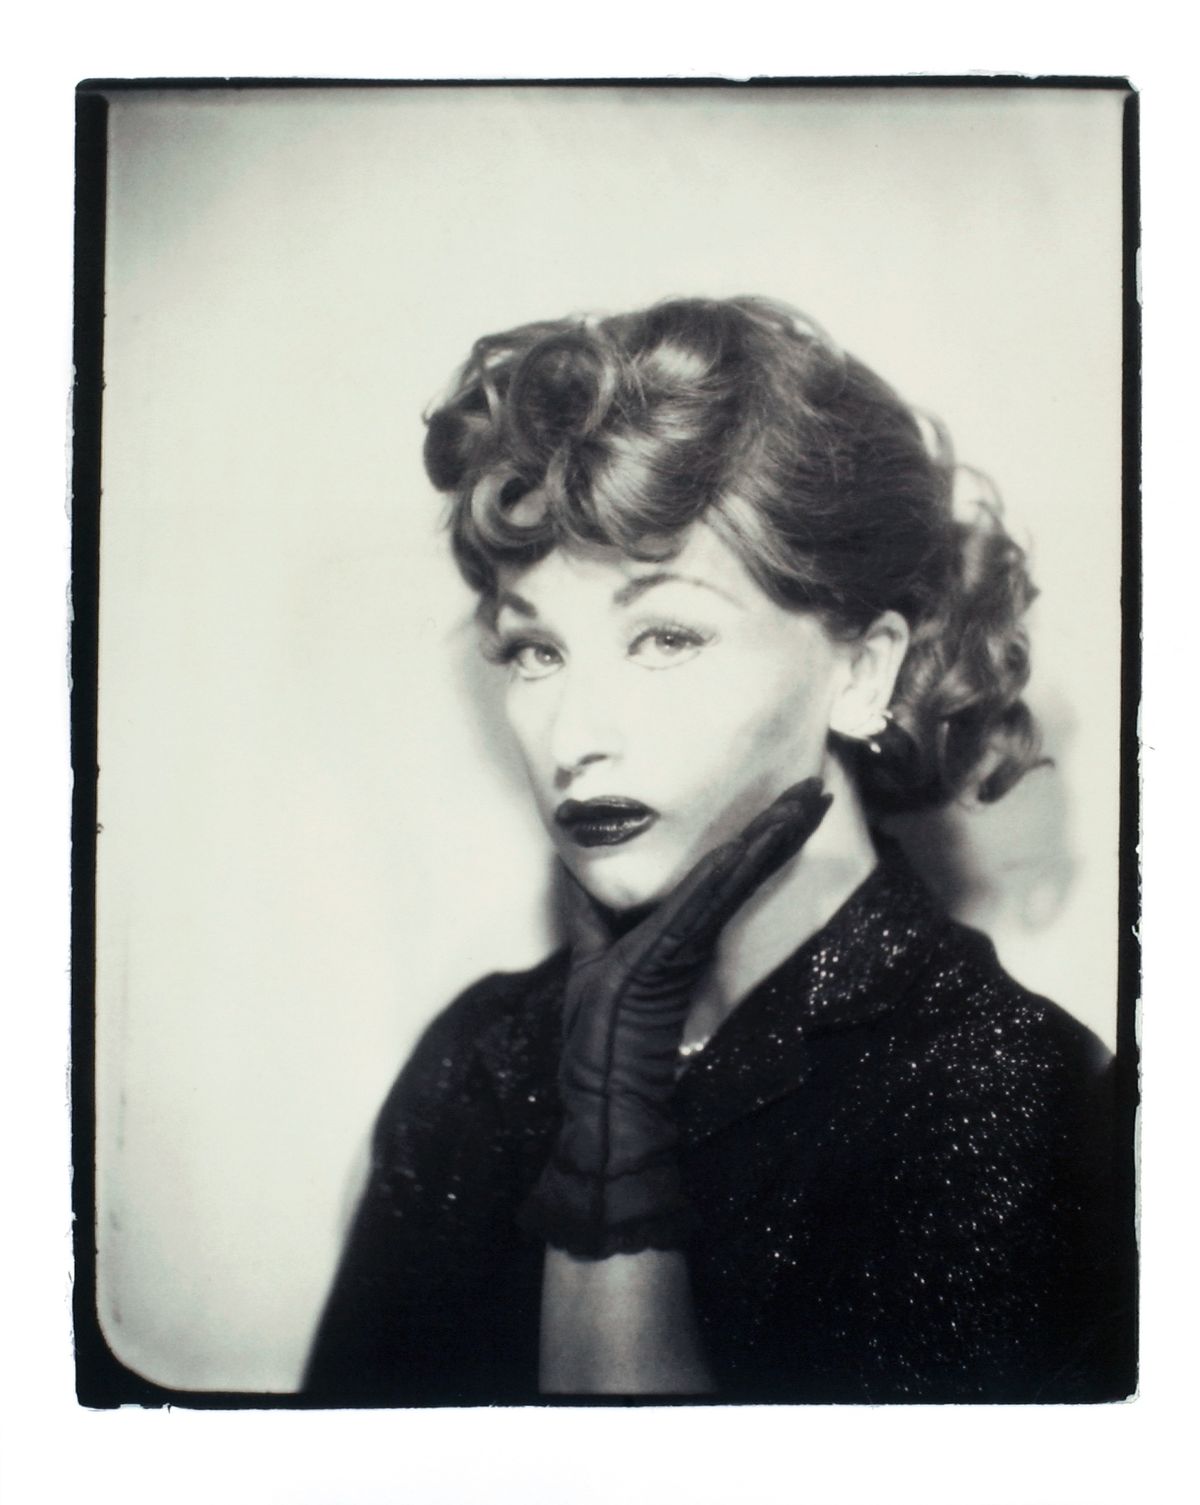 The truth about Cindy Sherman's society portraits, art